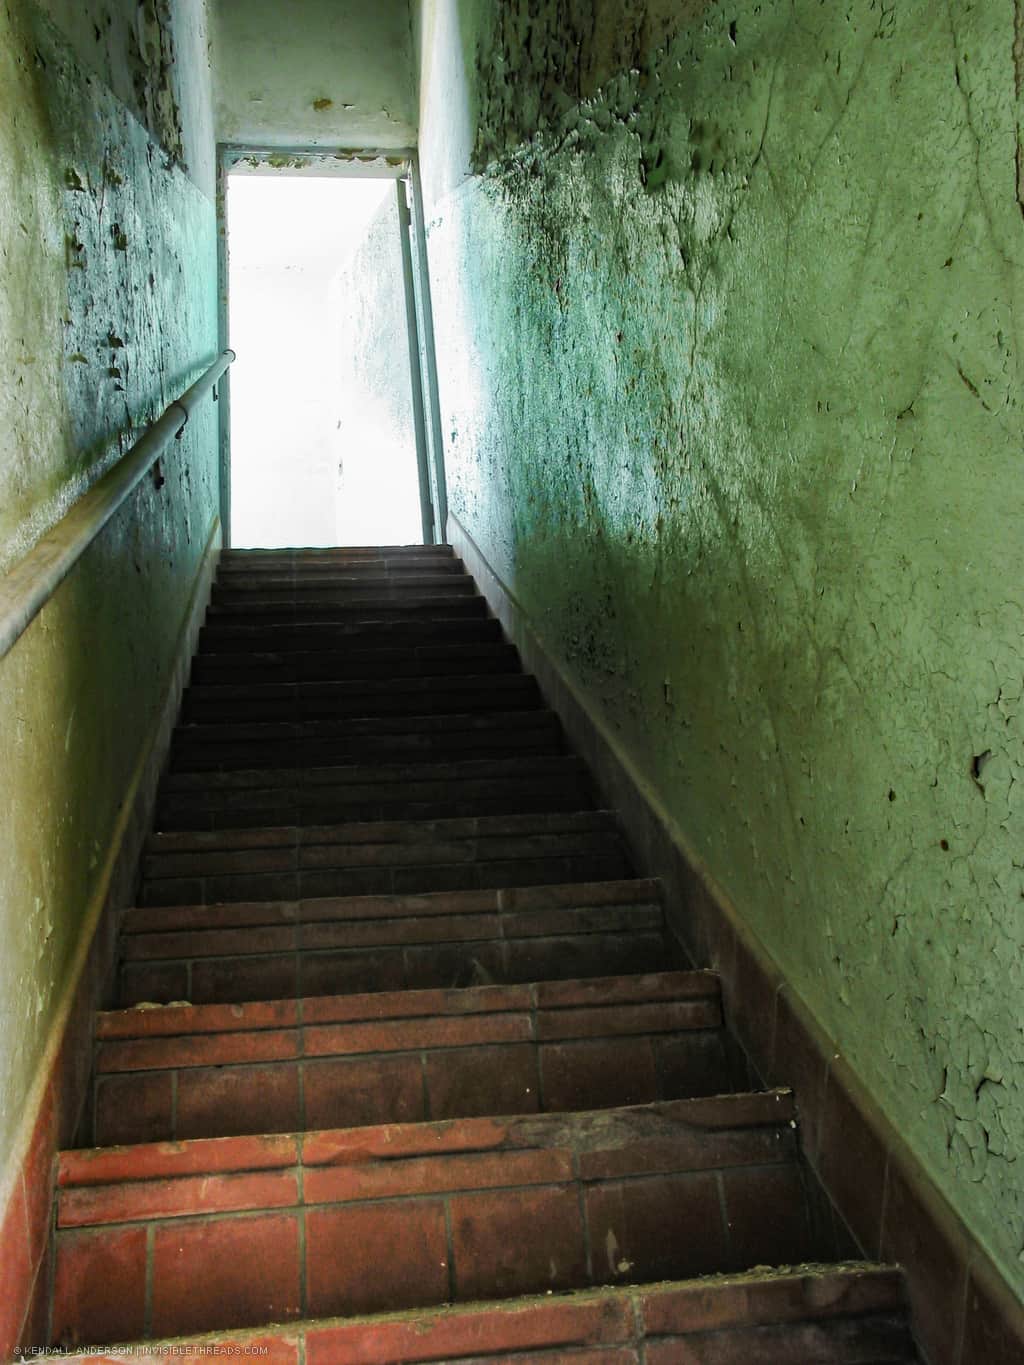 A stair leads up to the second floor, which is bright. The walls beside the stairs are green, dirty, and cracked.